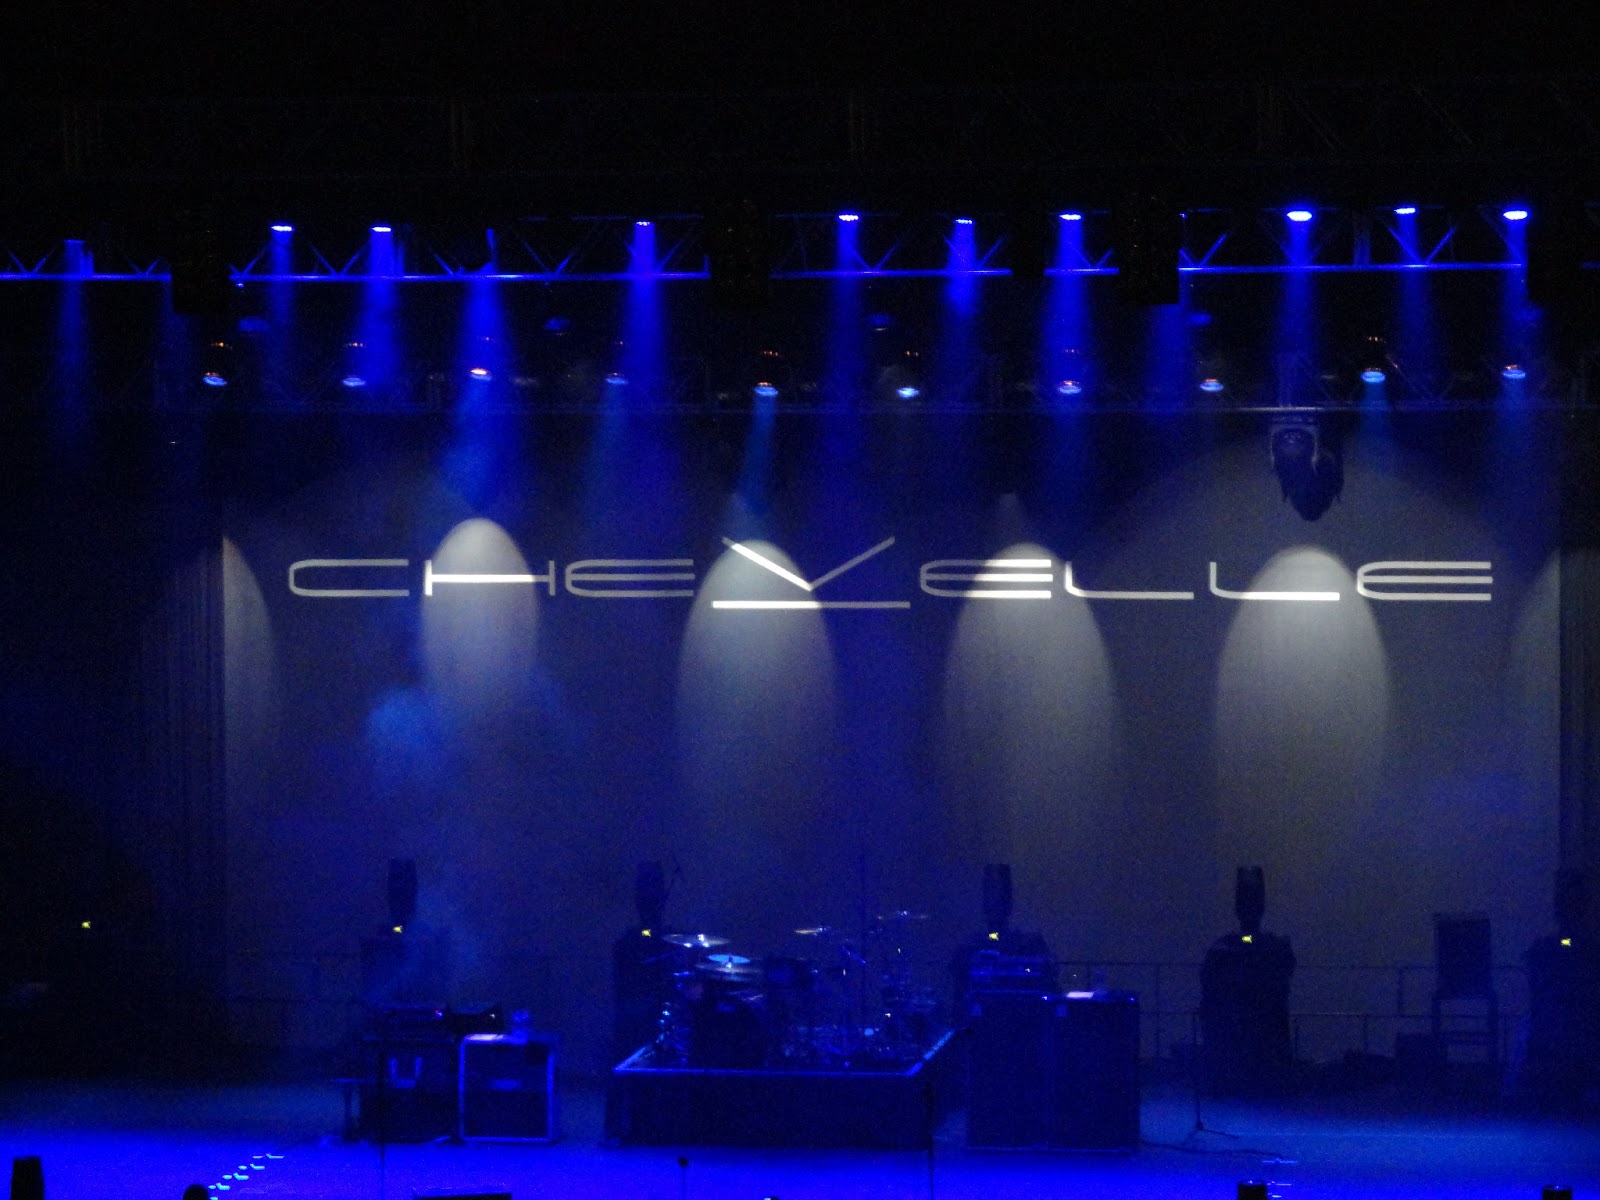 Chevelle Band Wallpaper A great band nonetheless